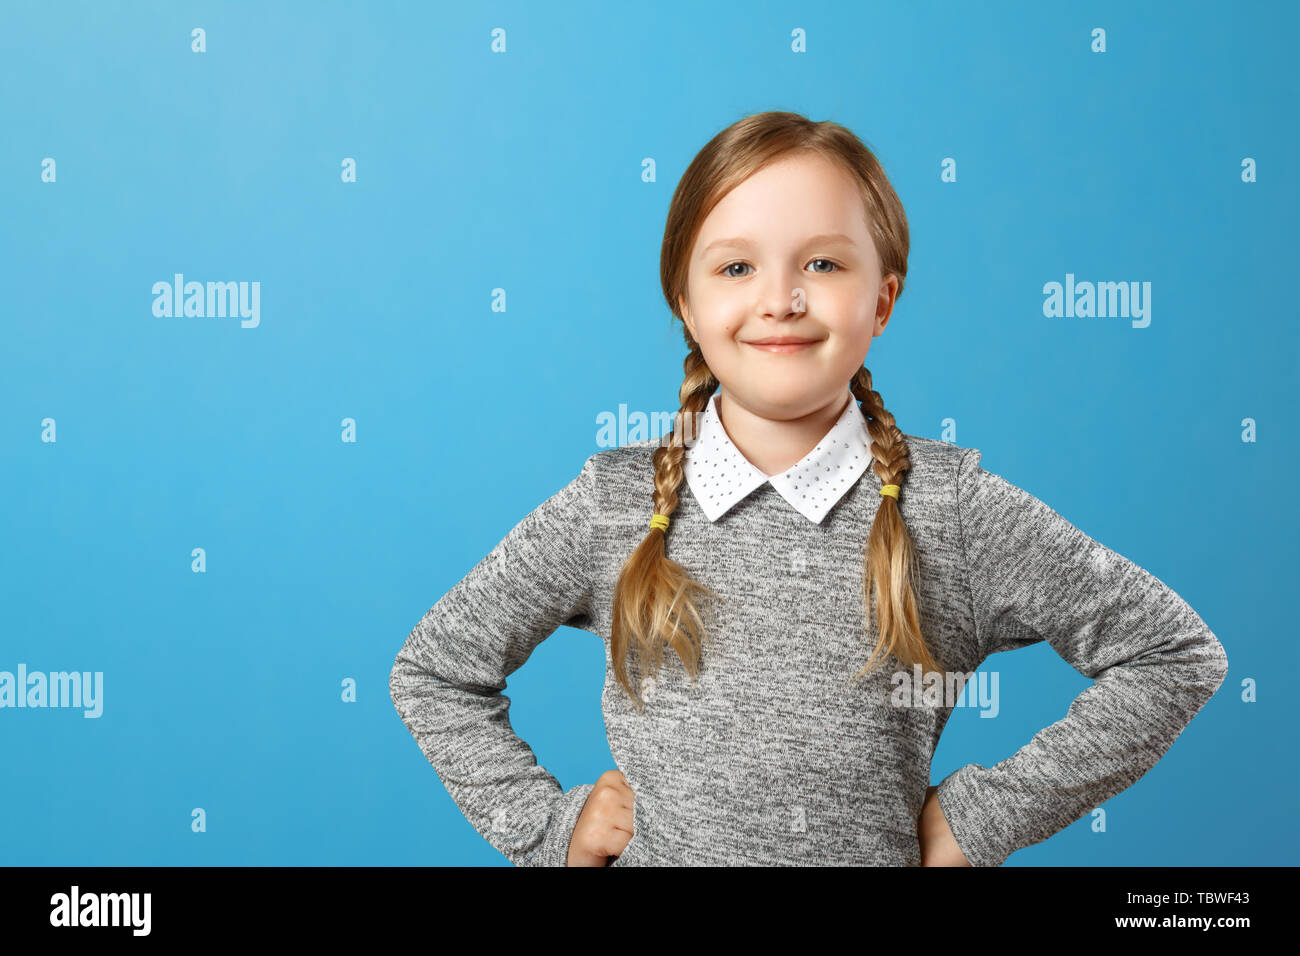 Portrait of a cute little girl on a blue background. Child schoolgirl made hands to the side and looks into the camera. Copy space. Stock Photo